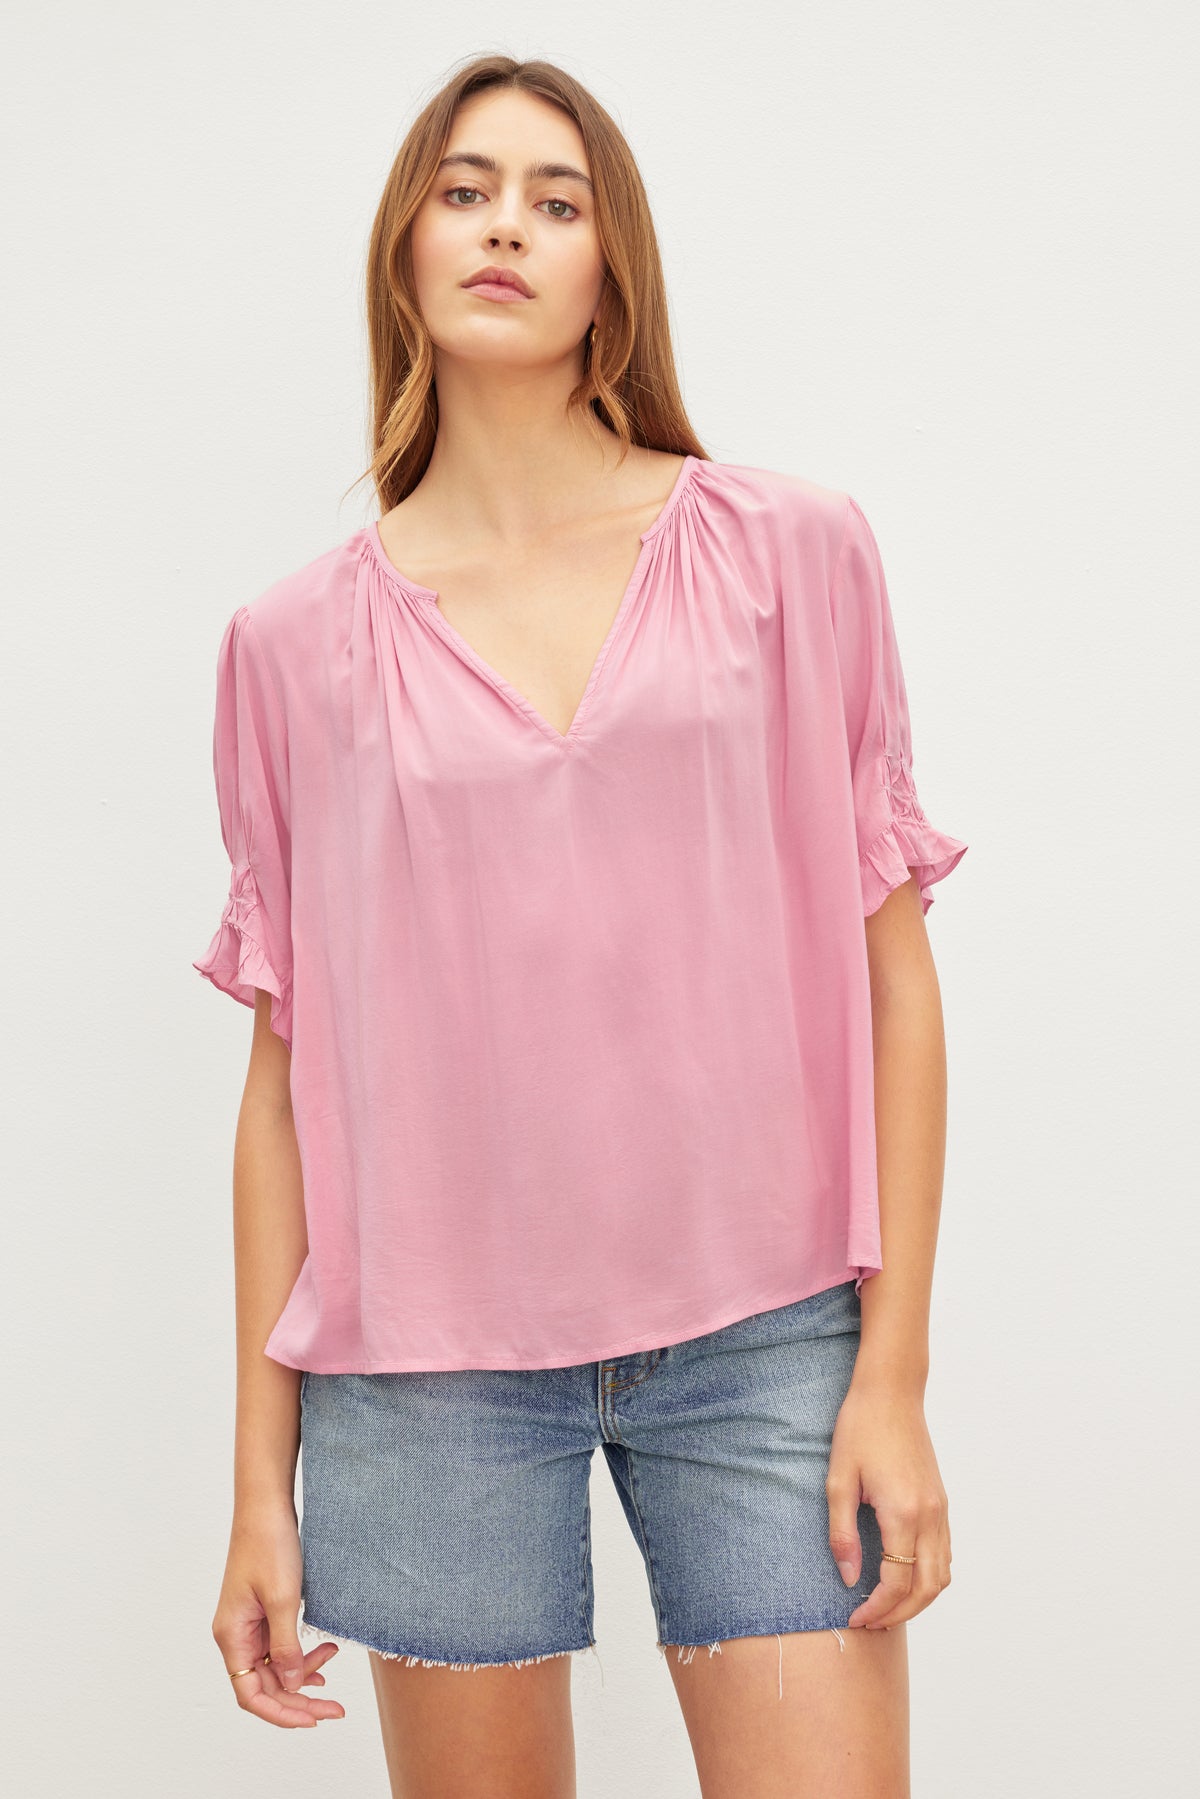 Woman in a CALISSA SPLIT NECK BLOUSE by Velvet by Graham & Spencer with shirred detailing and denim shorts standing against a neutral background.-36387174482113